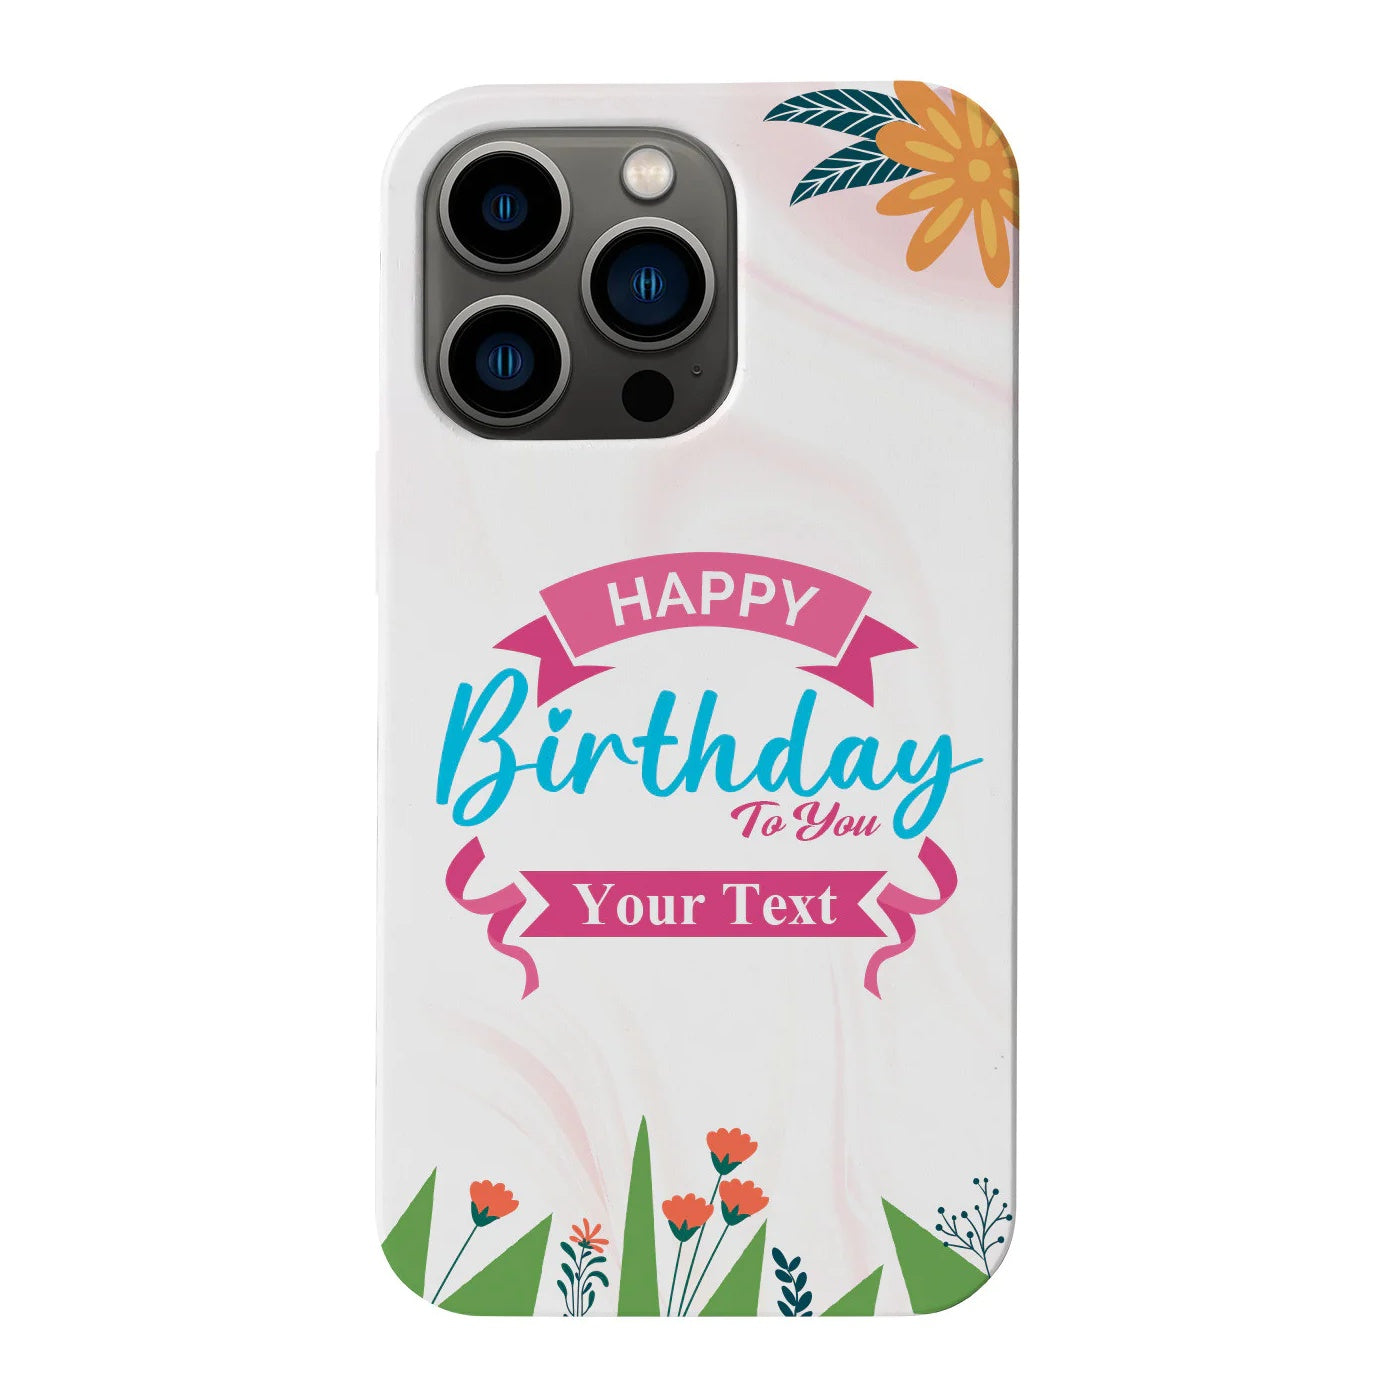 Happy Birthday To You - Customize Your Case